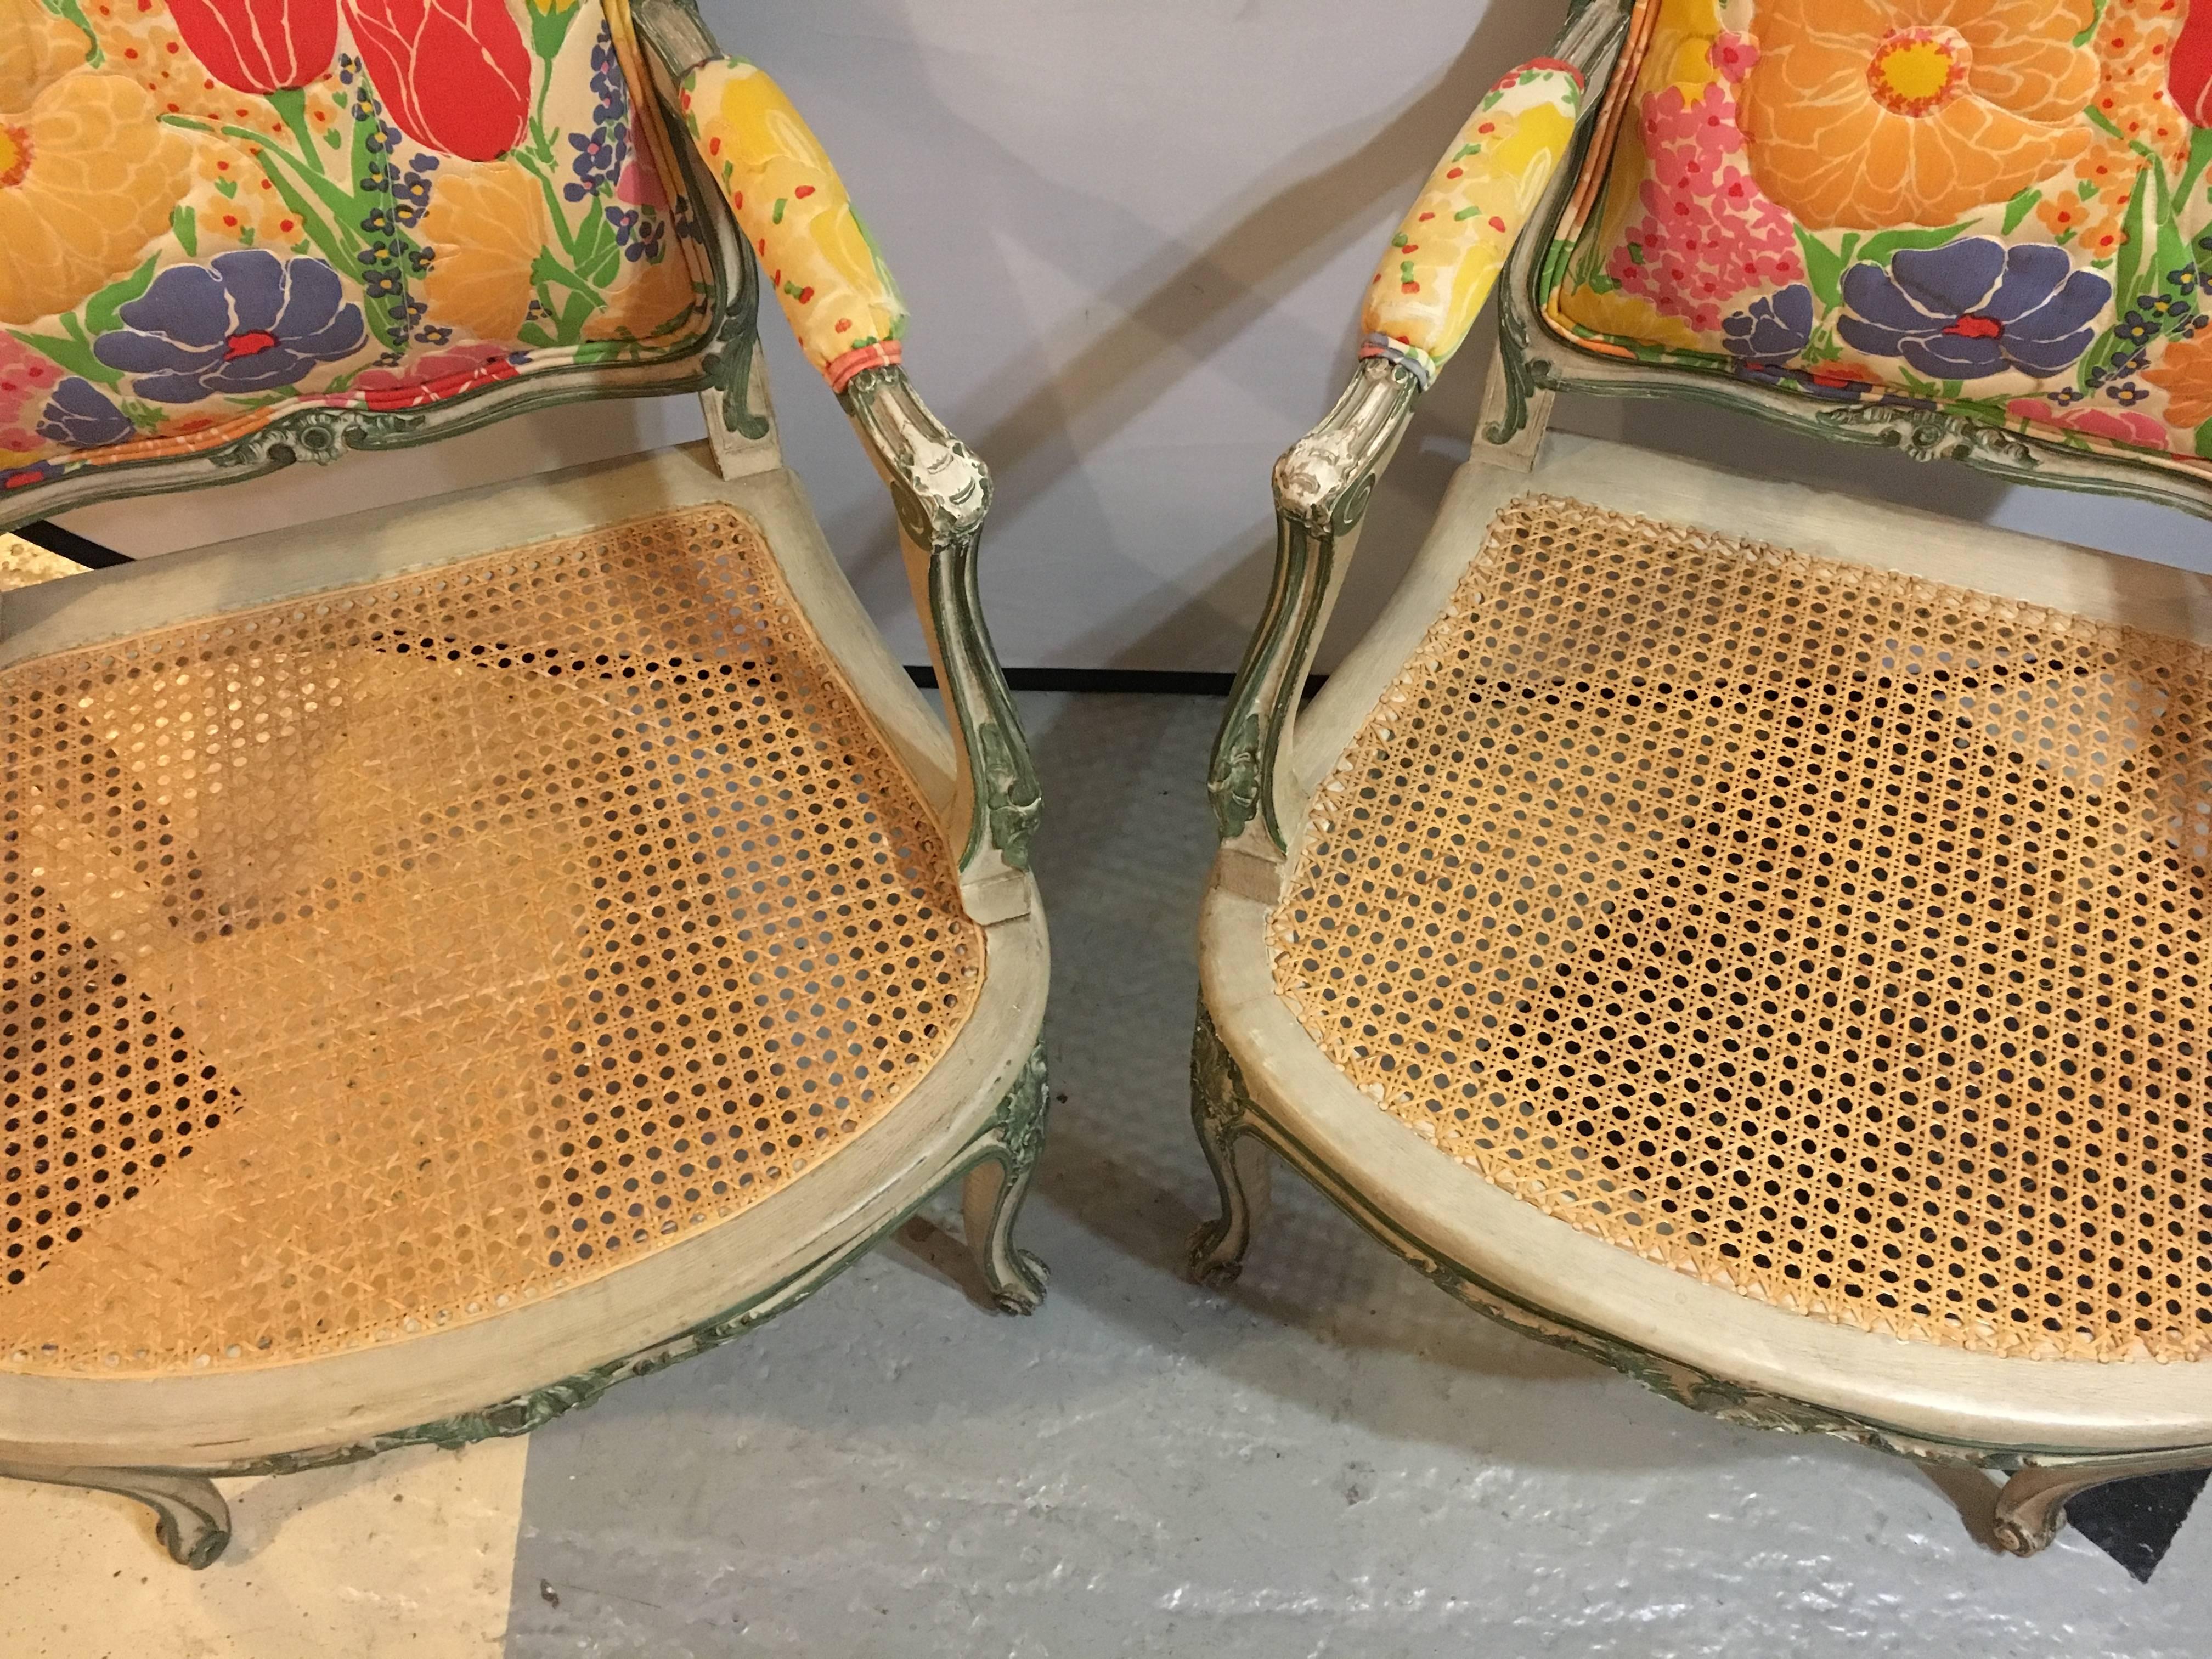 Pair of Louis XV style Hollywood Regency poly-chrome decorated fauteuils. This fine pair of attributed Jansen armchairs have cane seats which support stuffed colorful floral decorated cushions and backrests. Perfect for any Florida or sun-room.